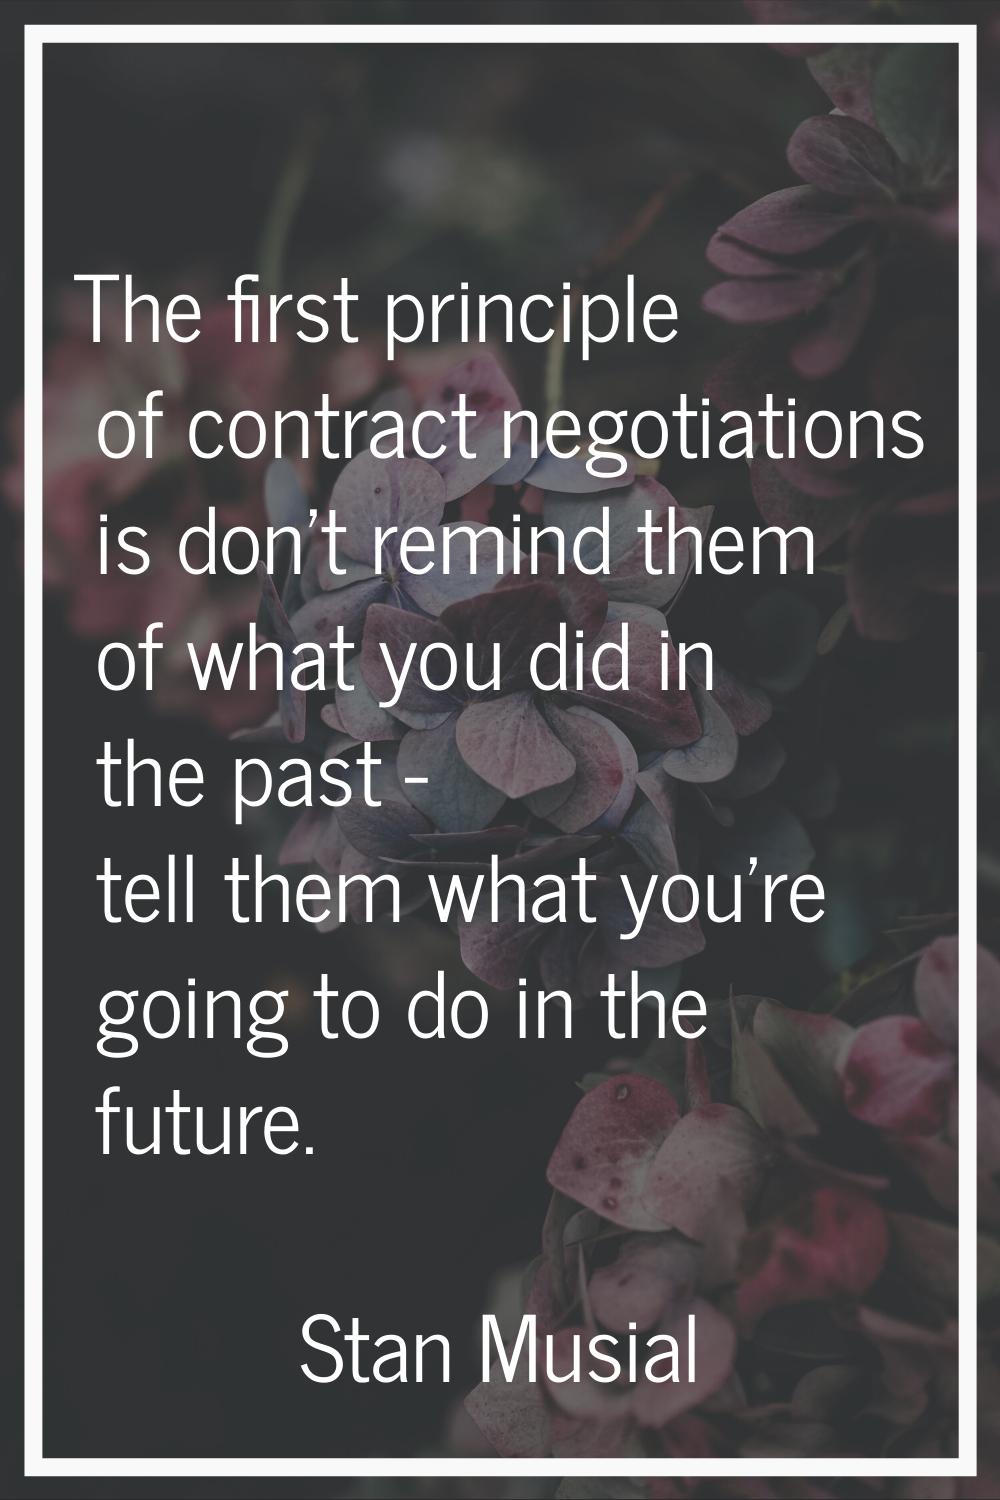 The first principle of contract negotiations is don't remind them of what you did in the past - tel